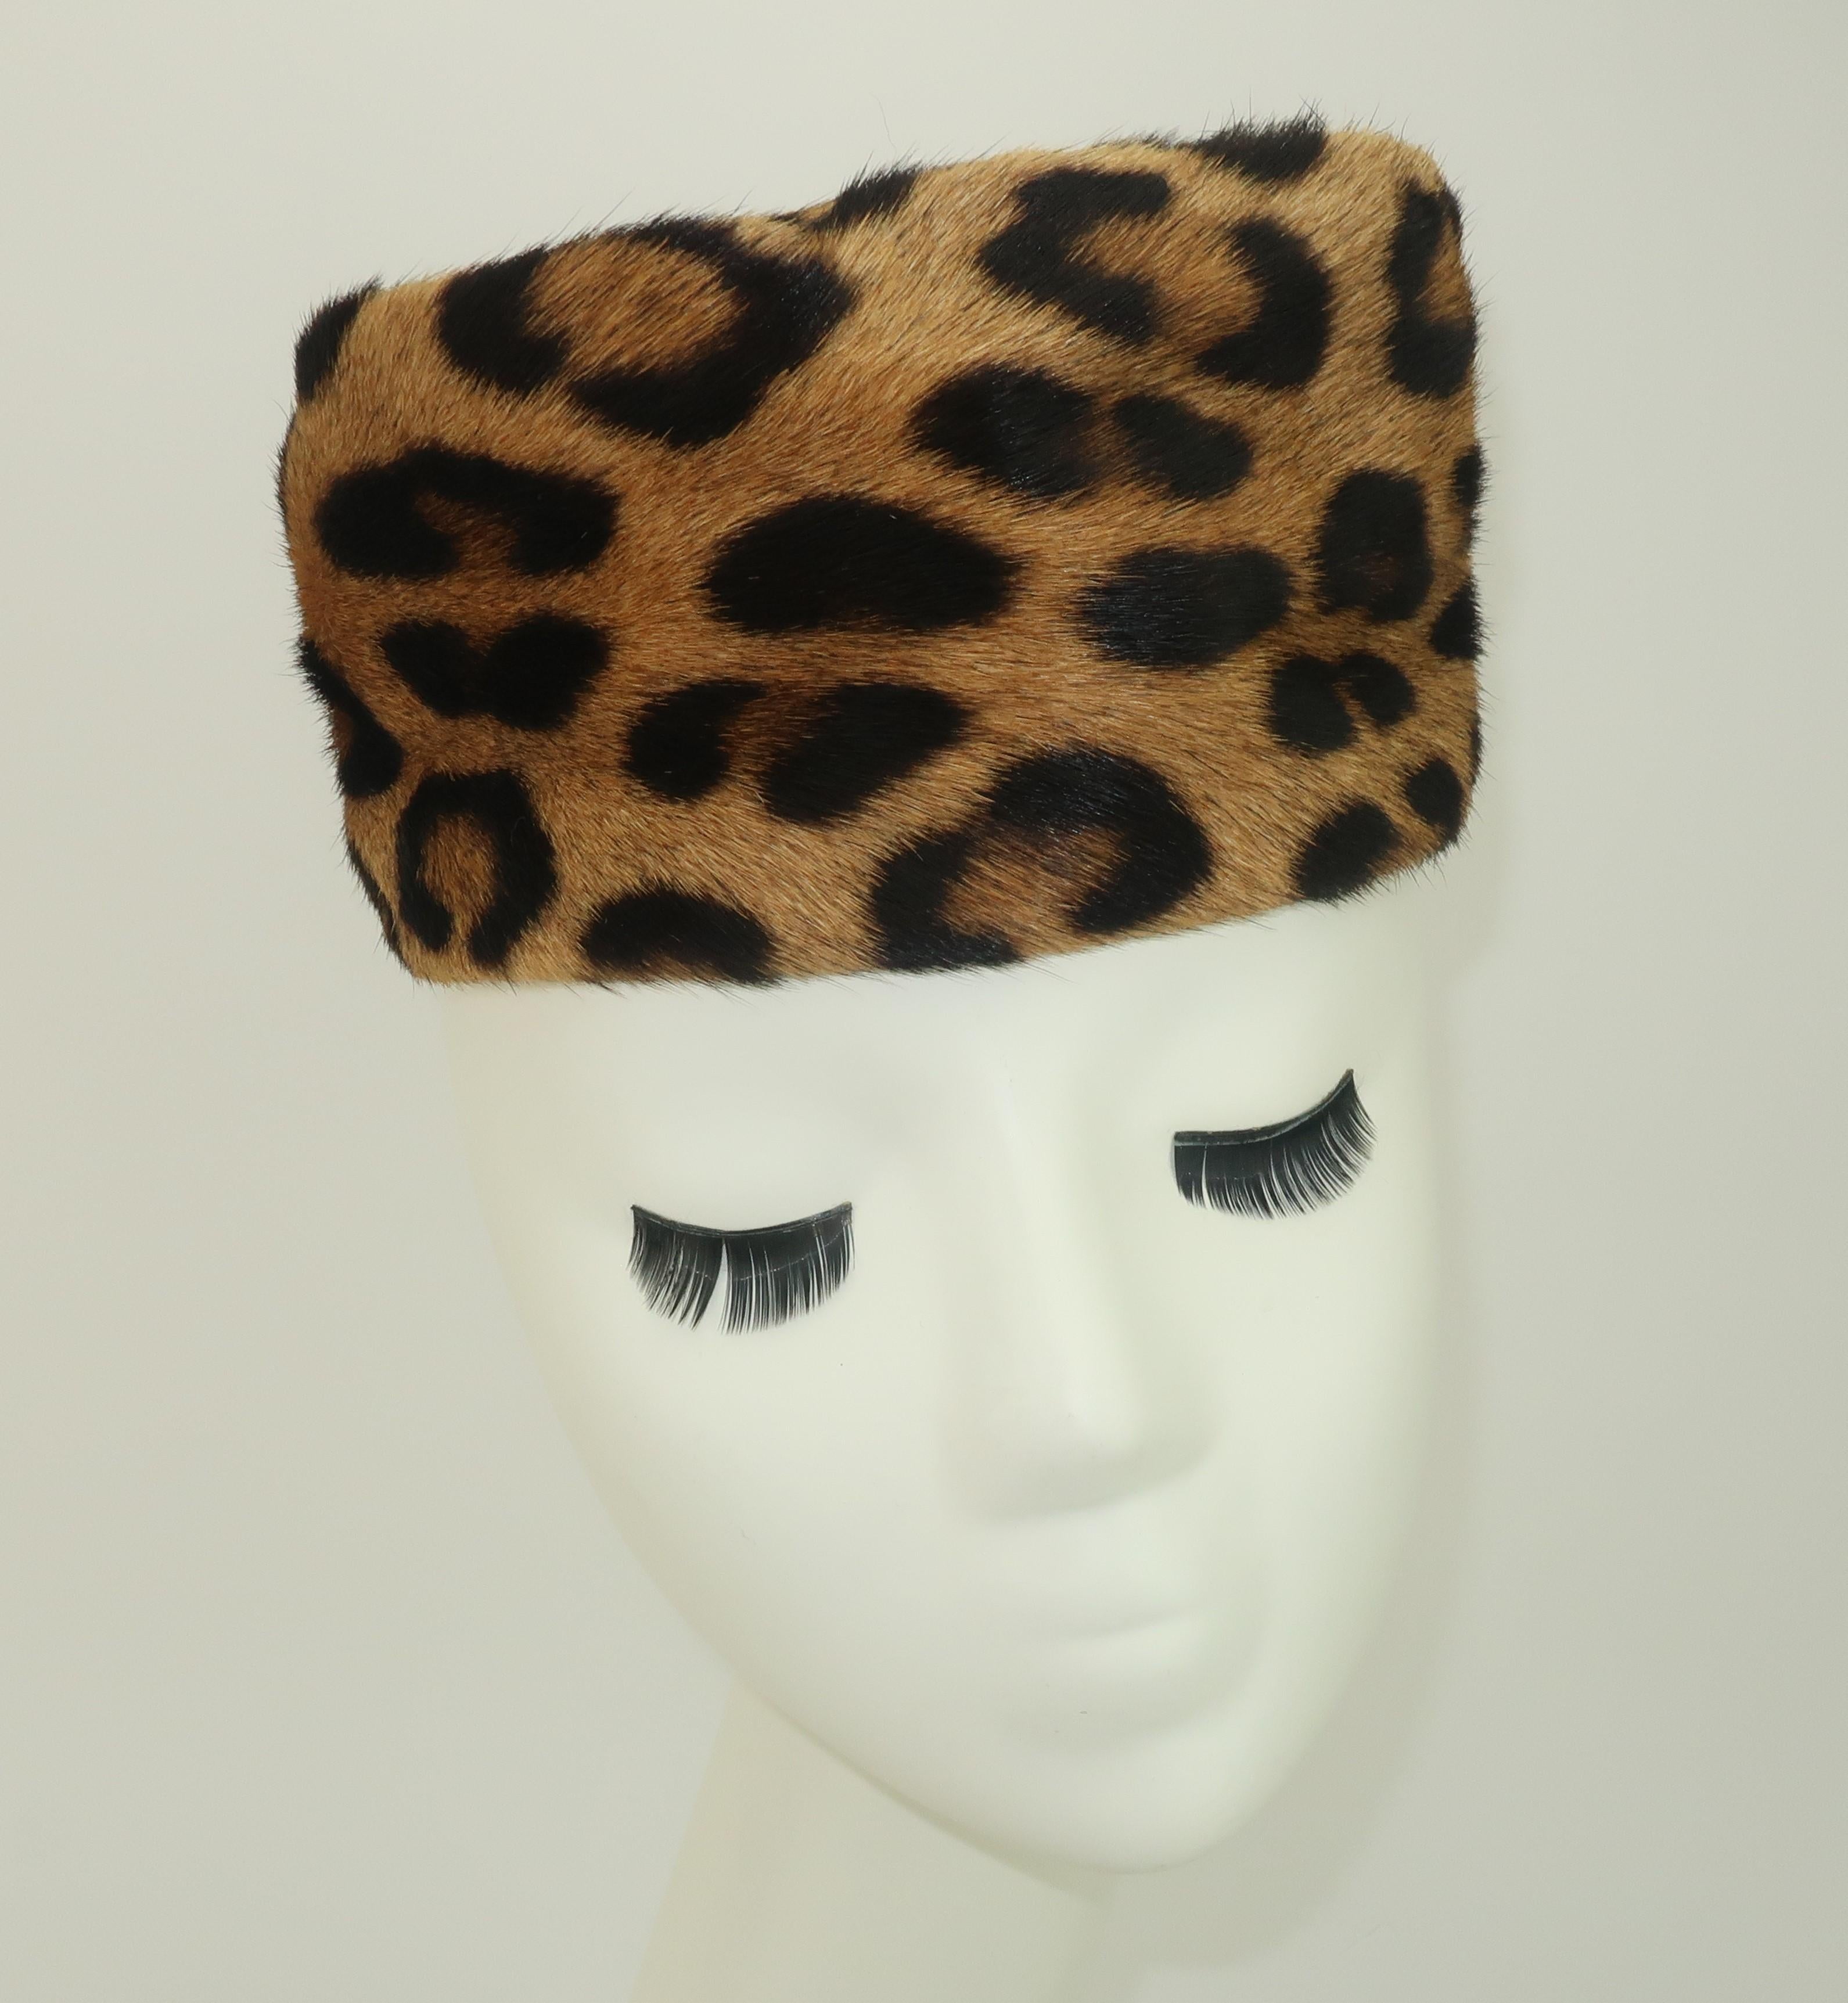 Add an exotic flavor to your wardrobe with this fashionable leopard printed fur pillbox hat. The minimalist shape can be worn forward, back or cocked to one side. Lined with black satin fabric and a grosgrain rim.  Purrrfect for a touch of vintage